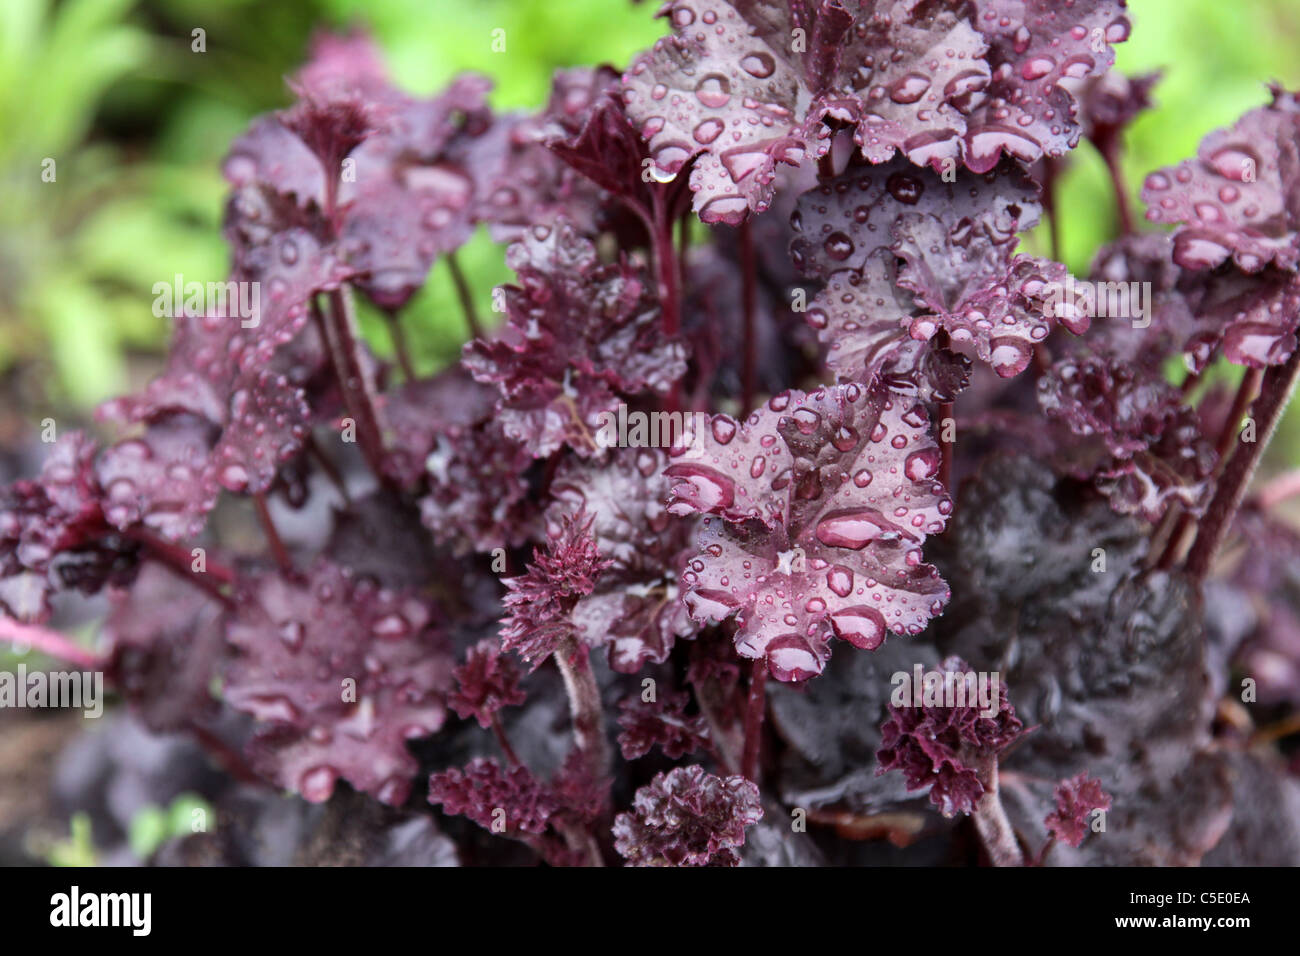 Obsidian Coral Bells Stock Photo